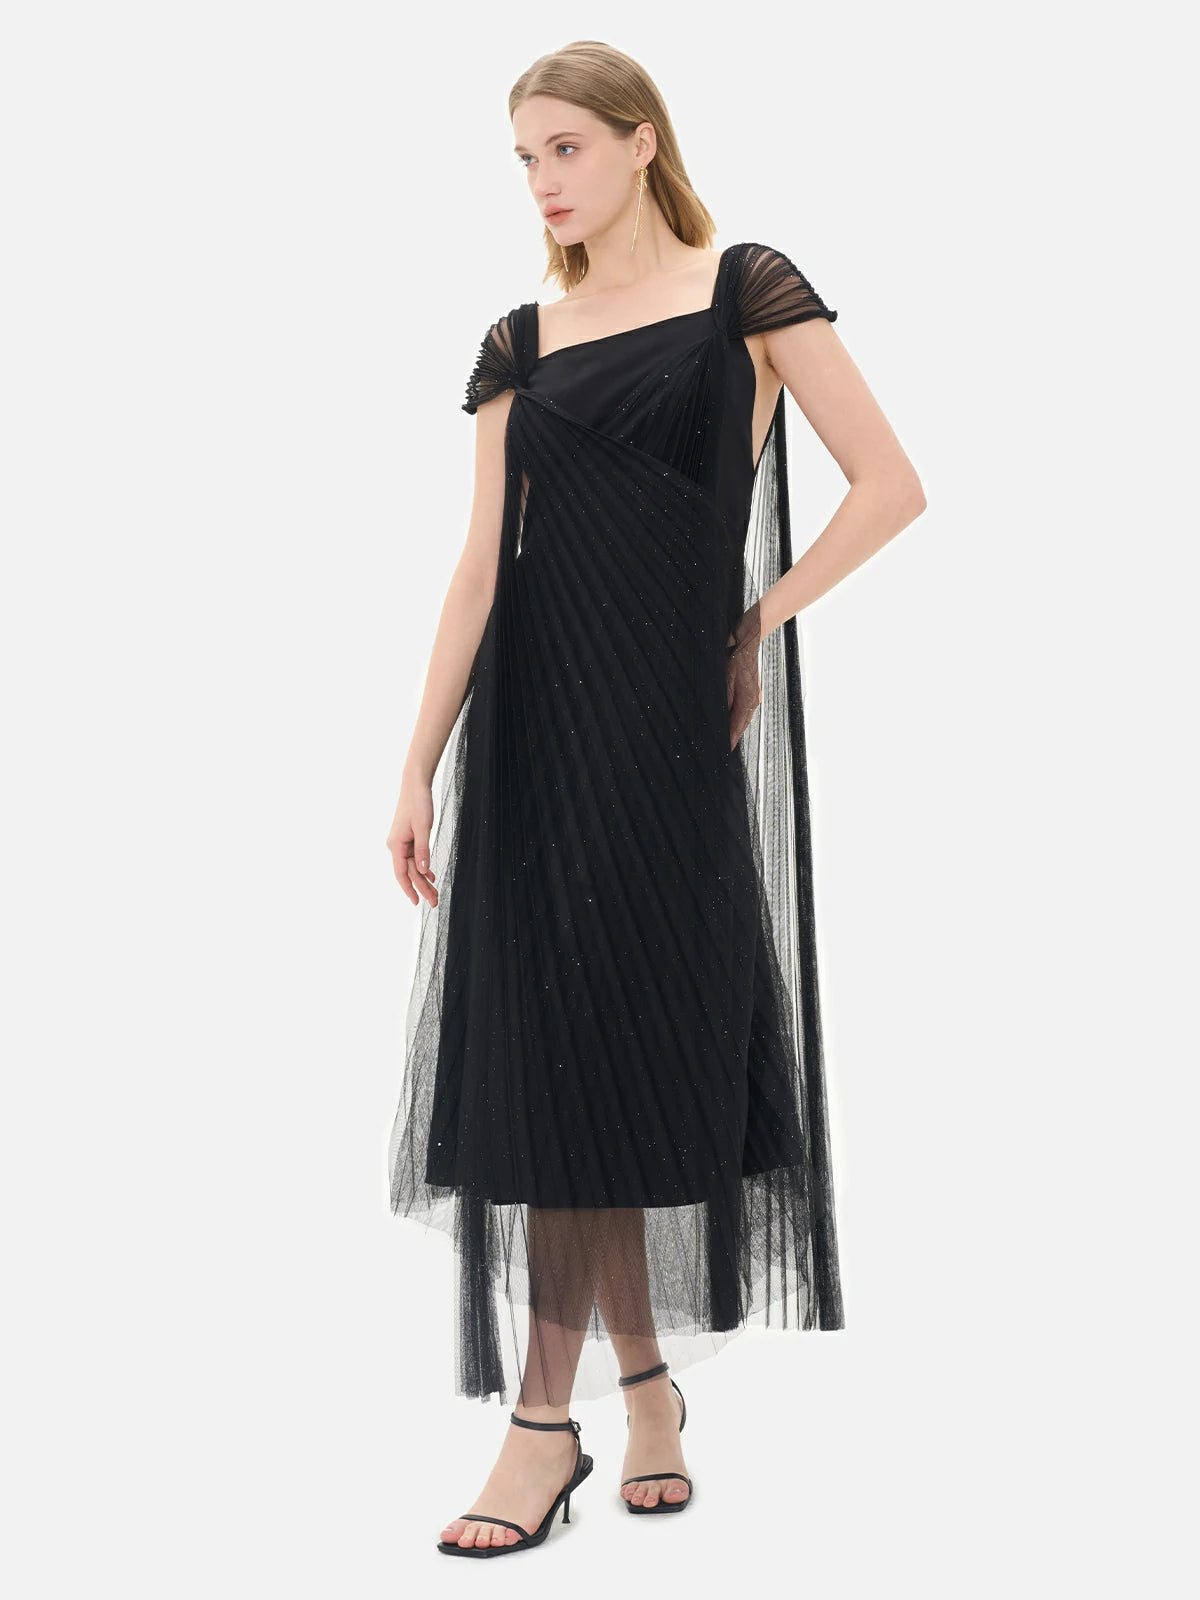 Formal black gown featuring a unique crisscross pleated mesh design, cap sleeves, and intricate sequin embellishments for a luxurious look.